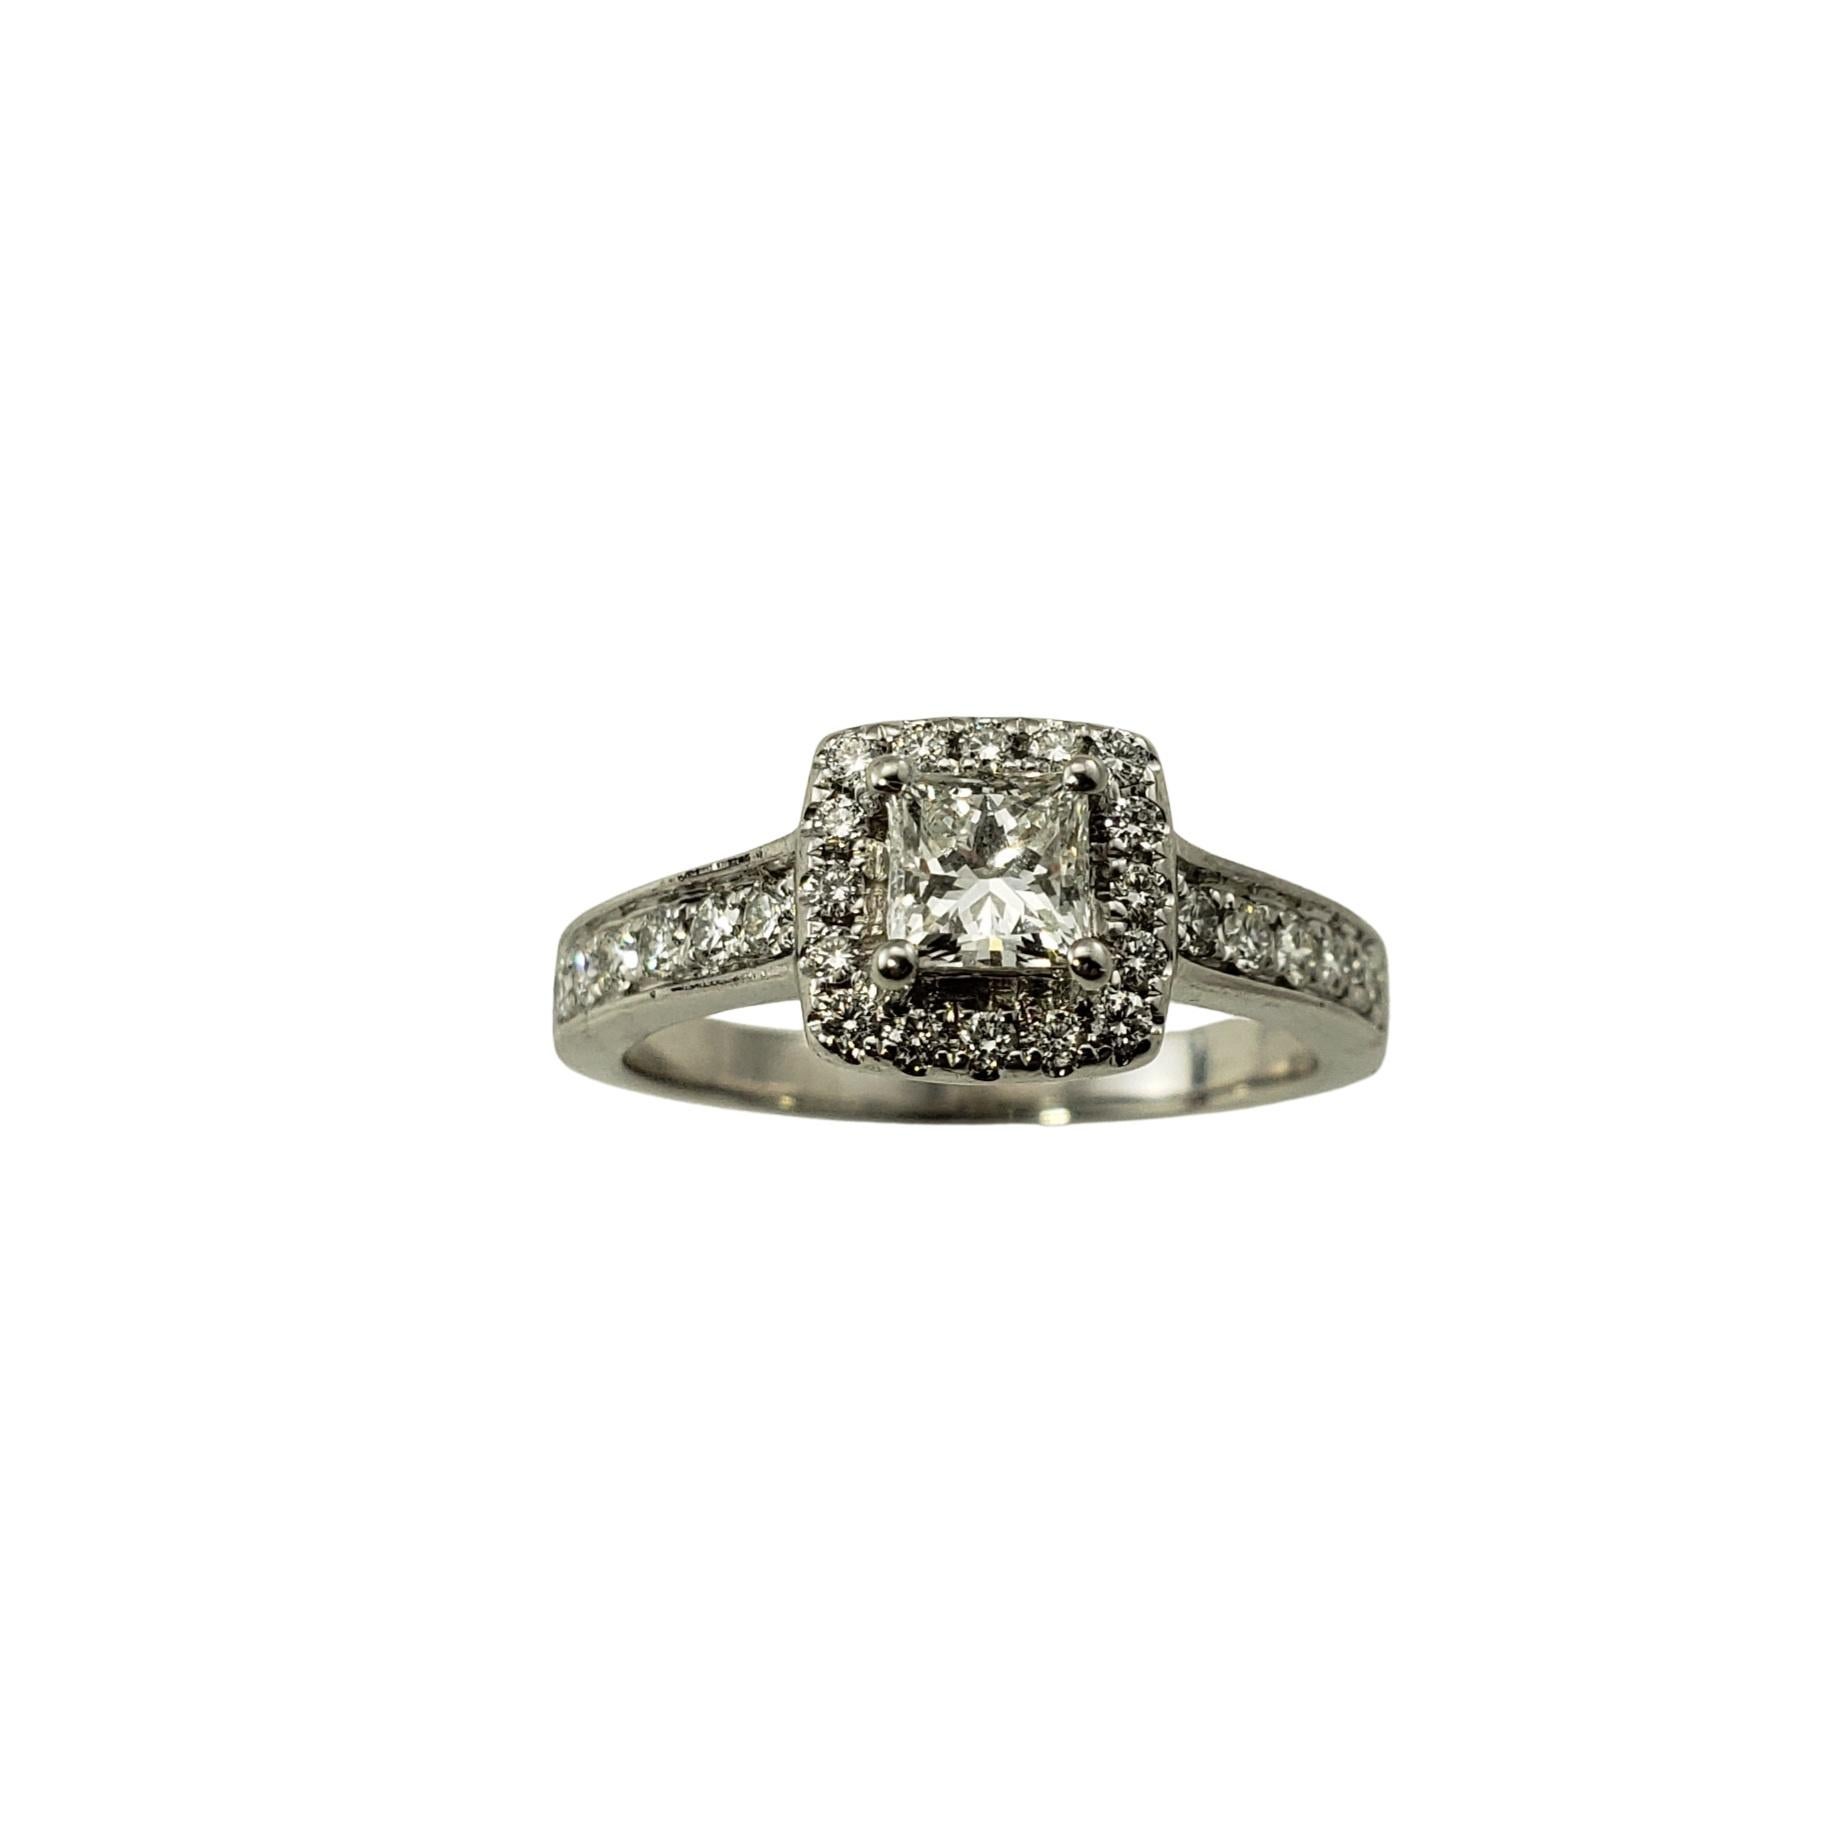 14 Karat White Gold Diamond Engagement Ring Size 7.75-

This sparkling ring features  a center princess cut diamond (.40 ct.) surrounded by 28 round brilliant cut diamonds on the halo and band.  Shank:  2.5 mm

Approximate total diamond weight:  .80